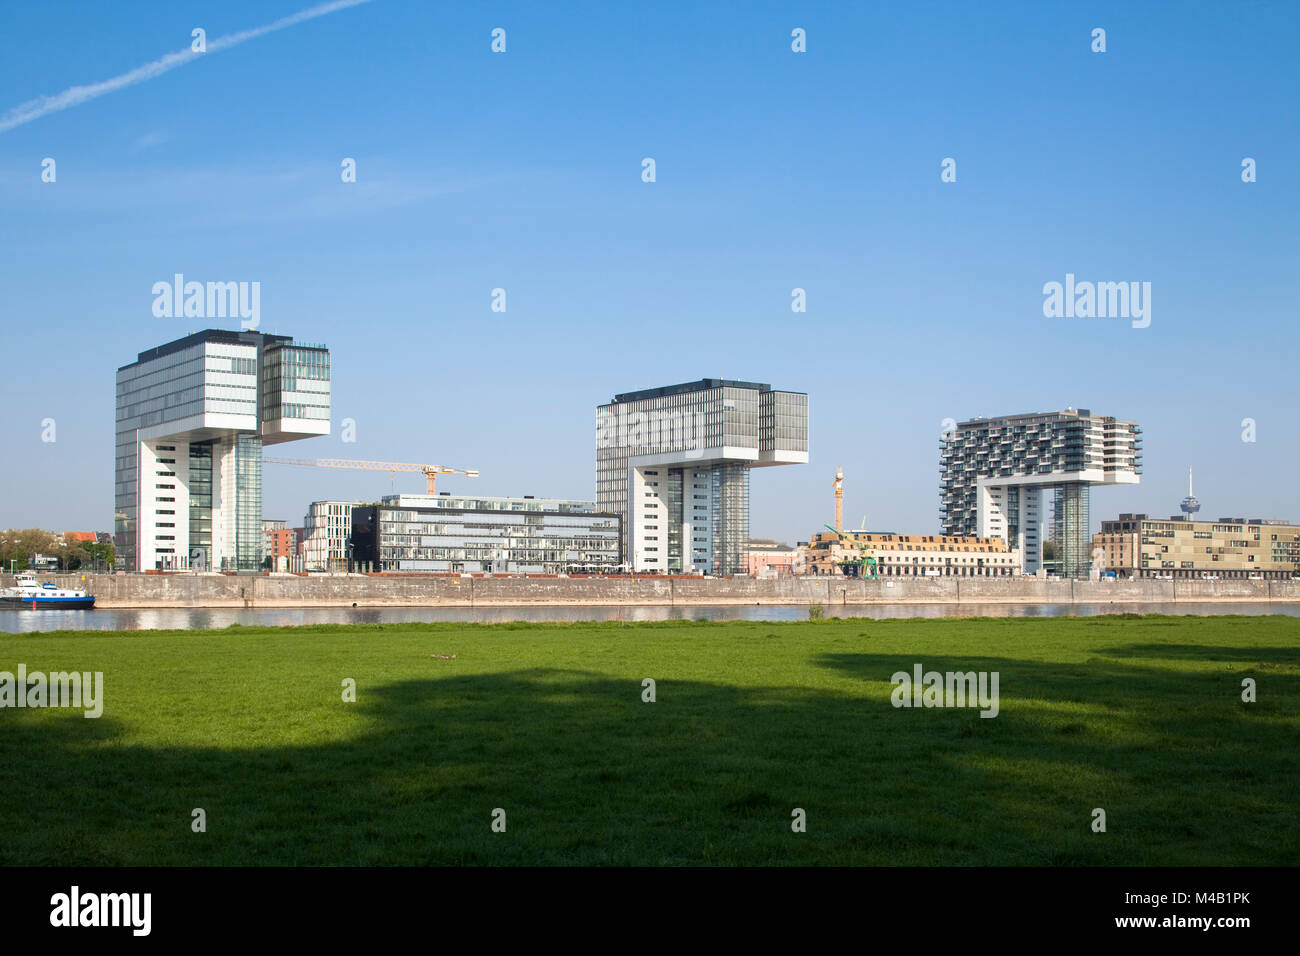 Urban development project in the old industrial harbour 'Rheinauhafen' at the river Rhine in Cologne, Germany Stock Photo